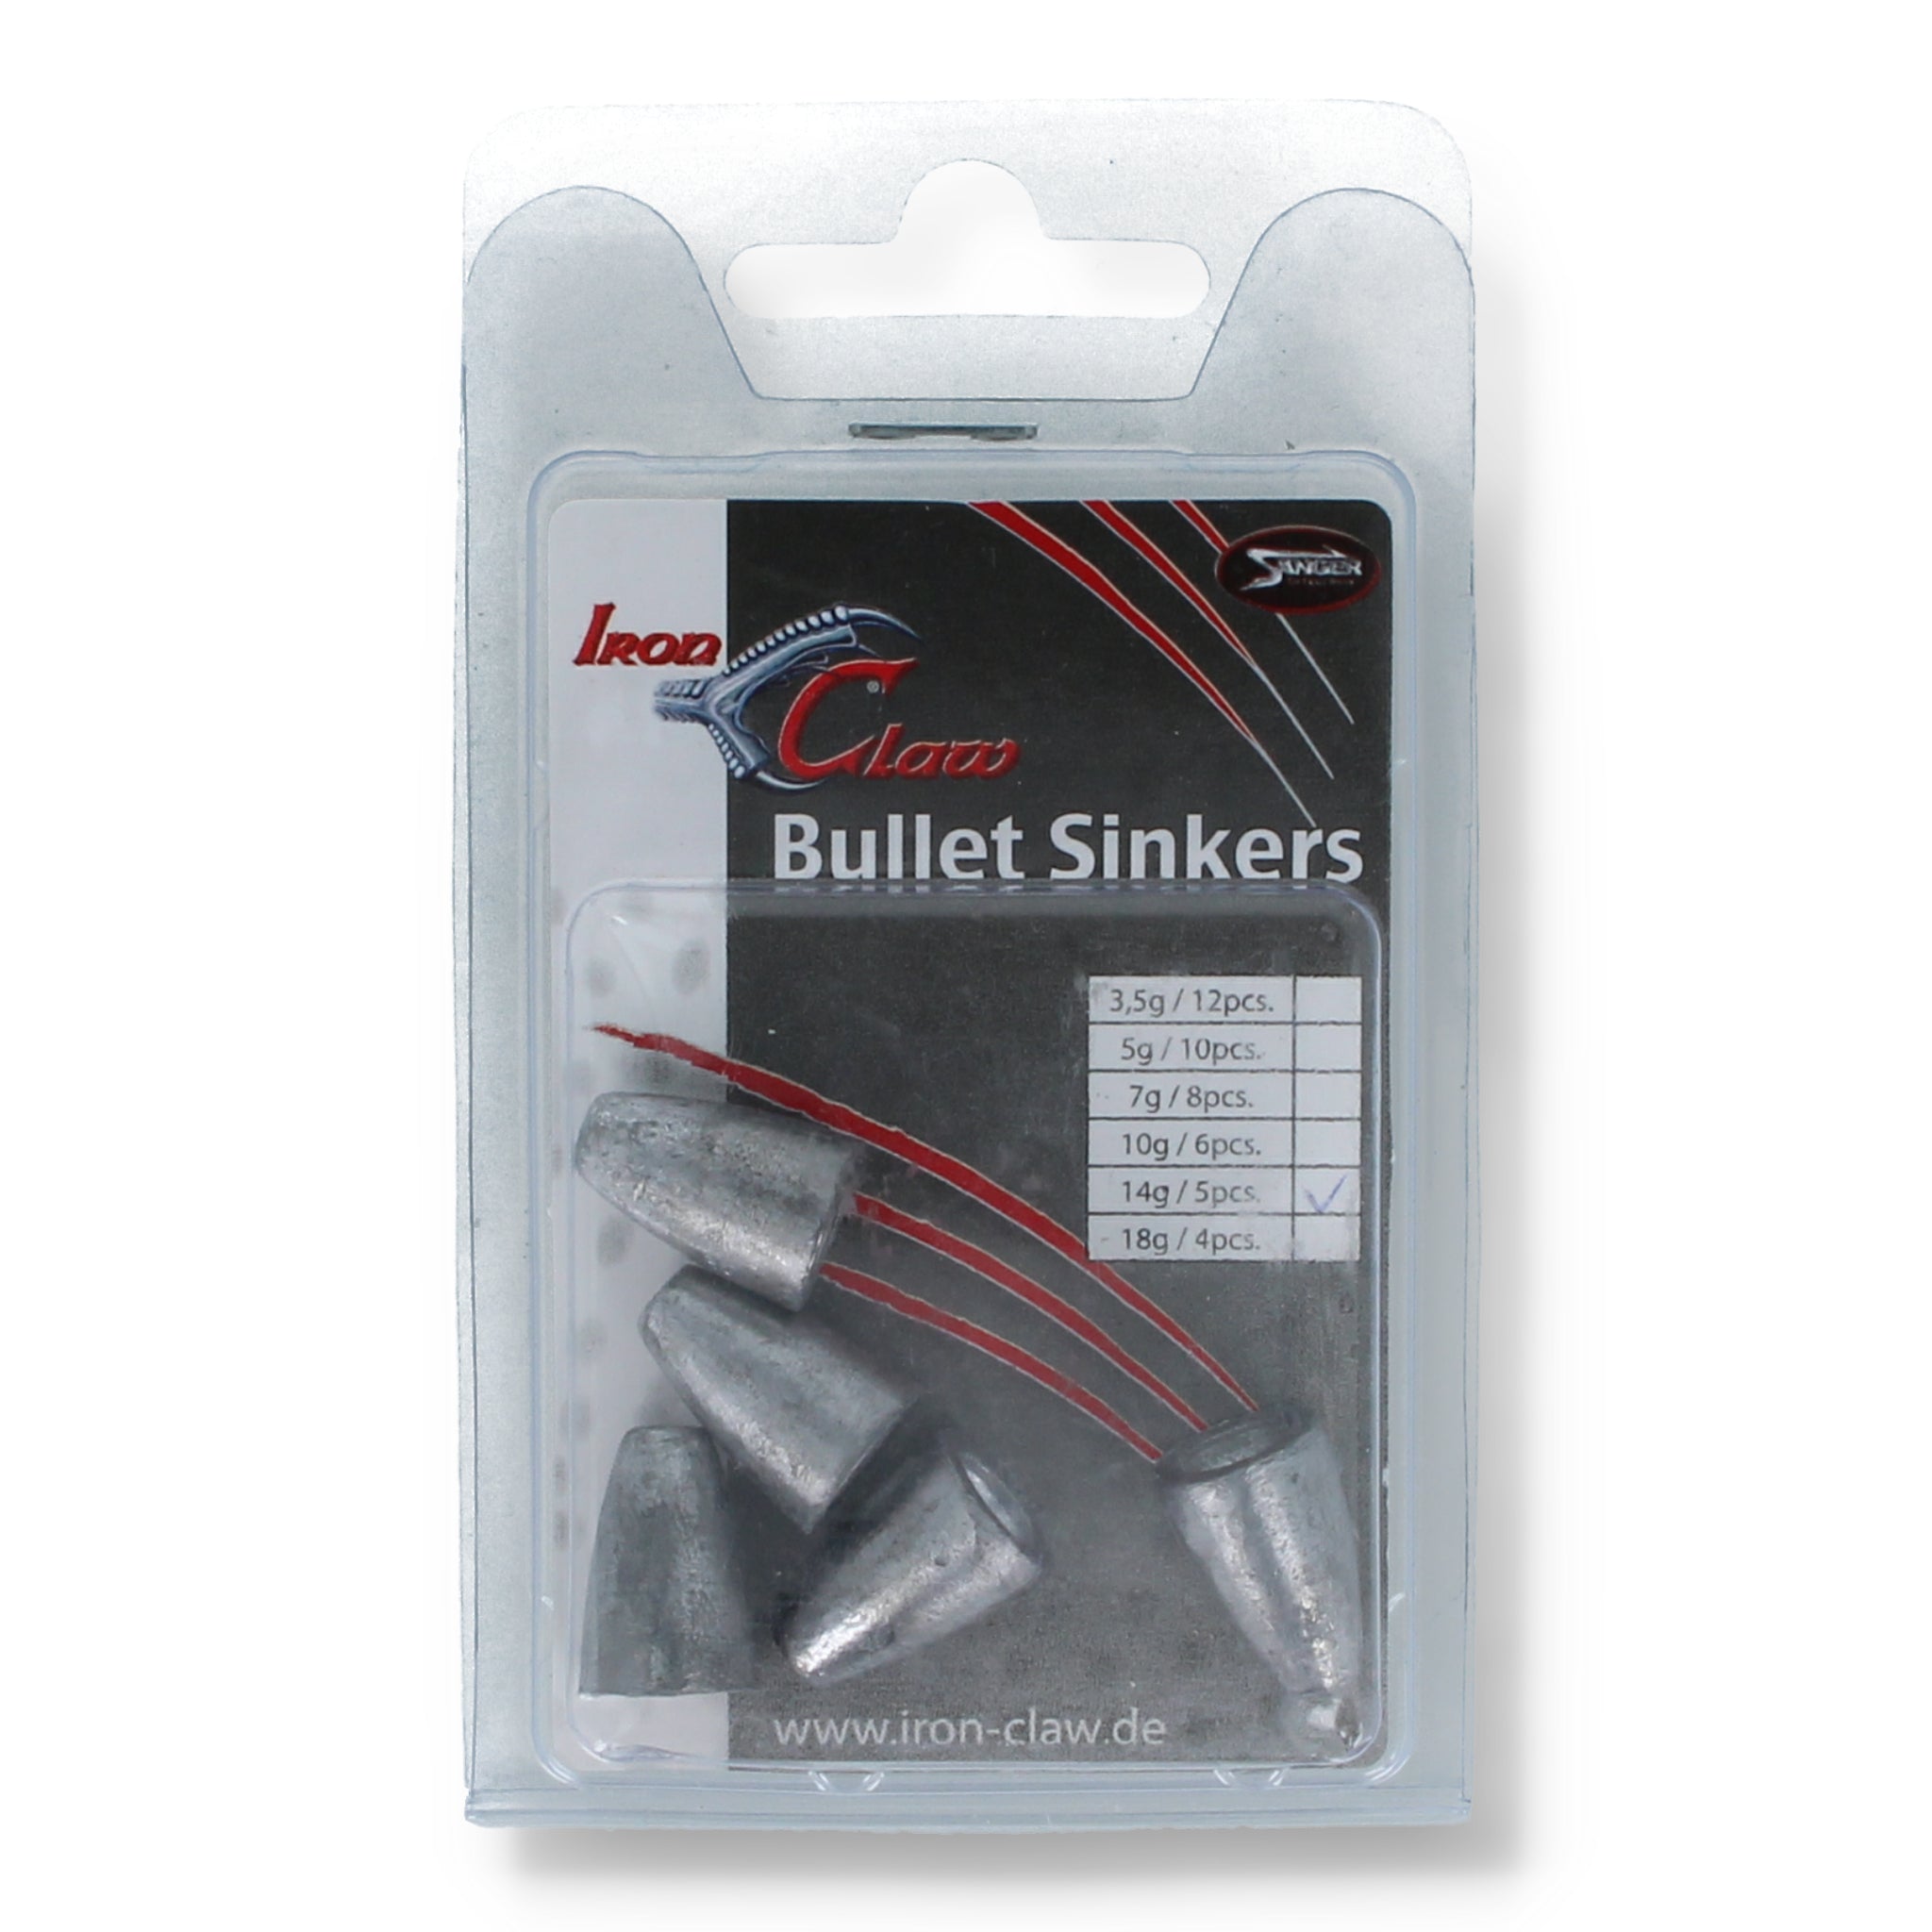 Iron Claw Bullet Sinkers